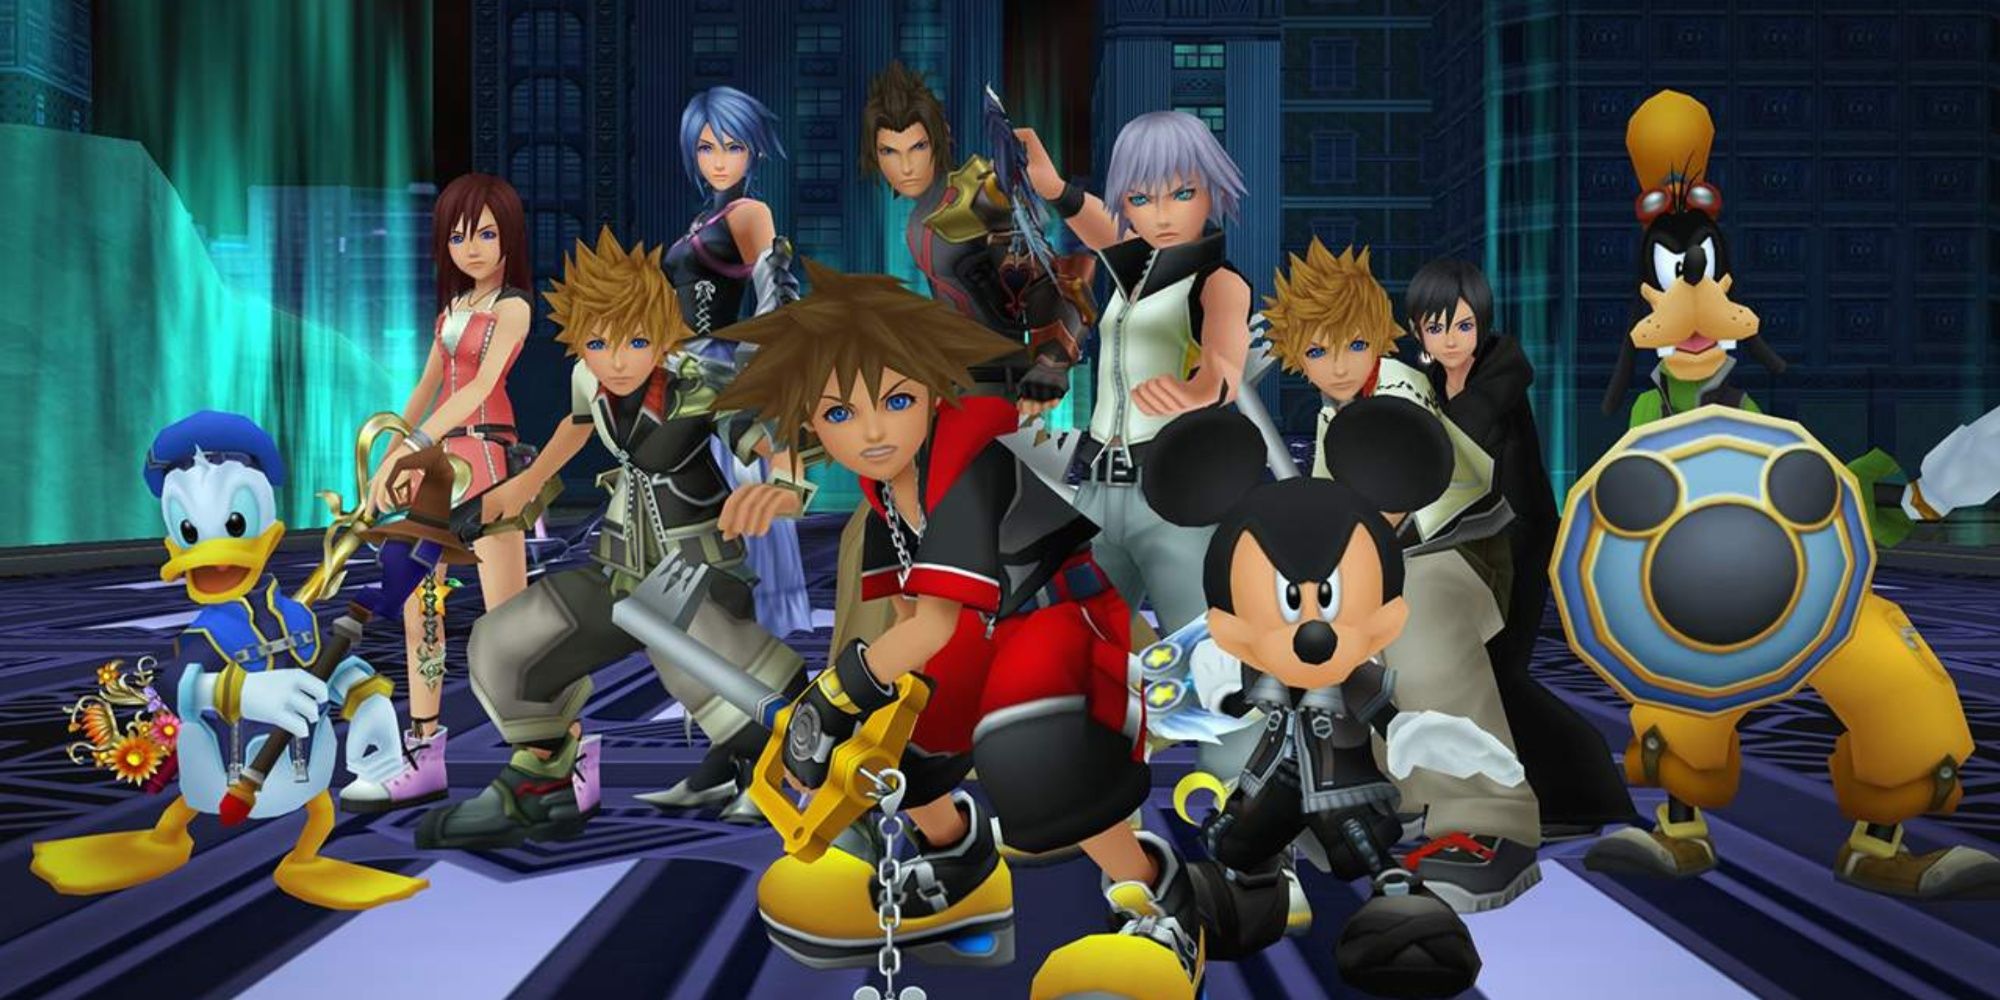 sora surrounded by the cast of kingdom hearts